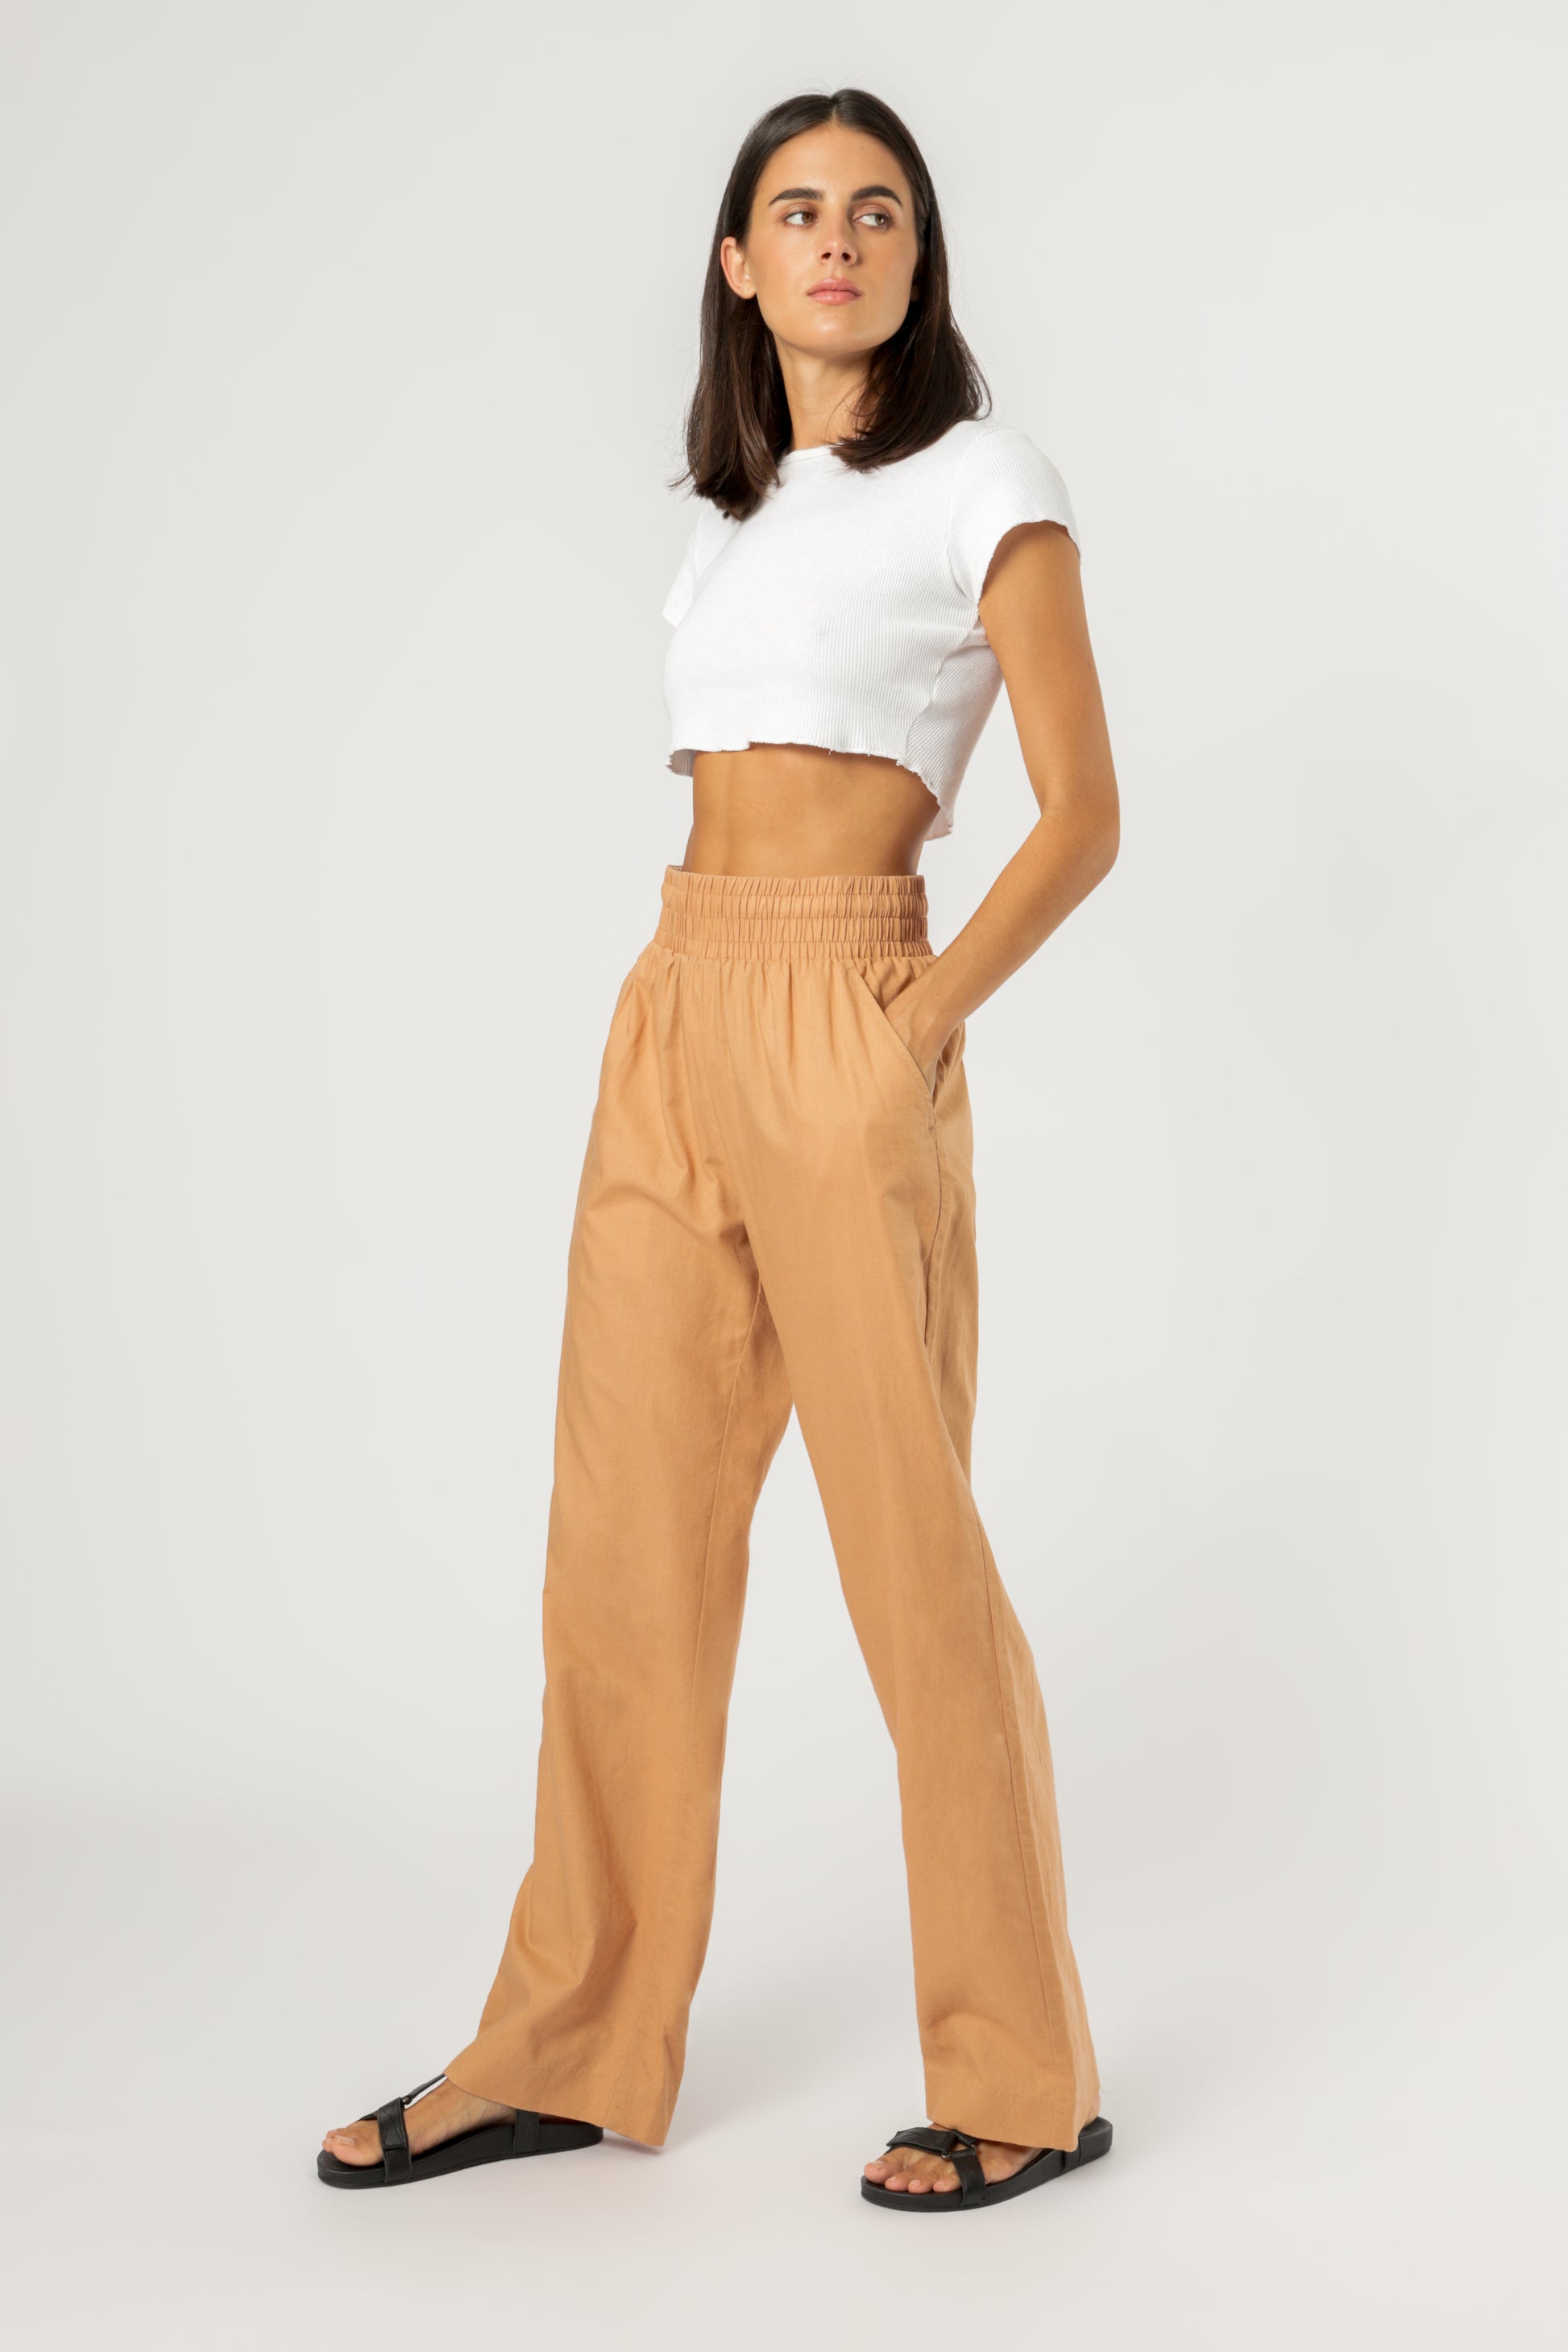 Nude Lucy amber linen pant clay pants